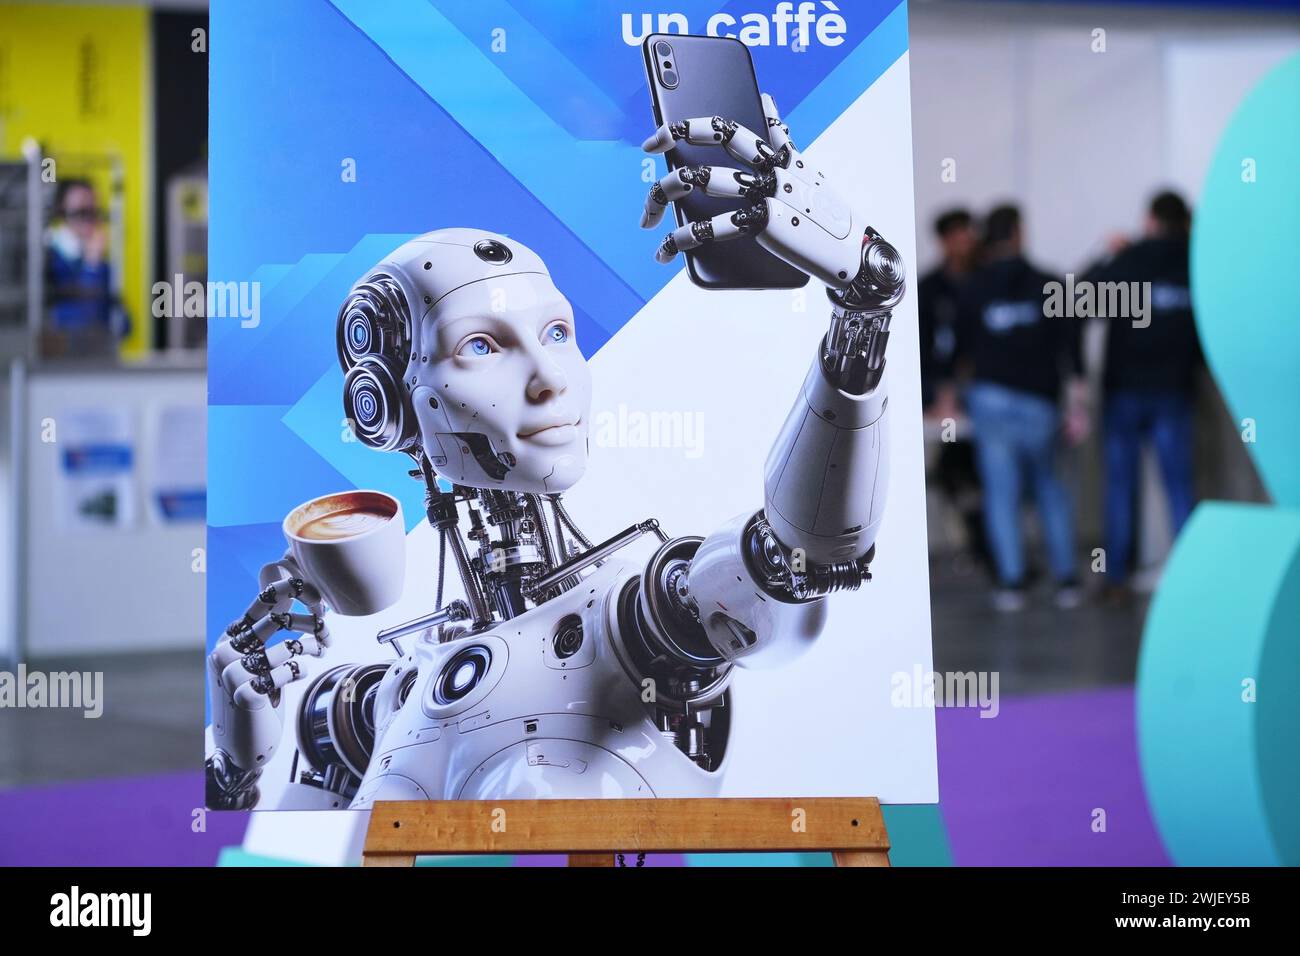 Turin, Italy - February 14, 2024: The image of a robot taking a selfie with a coffee cup greets visitors at the entrance to the annual technology fair Stock Photo